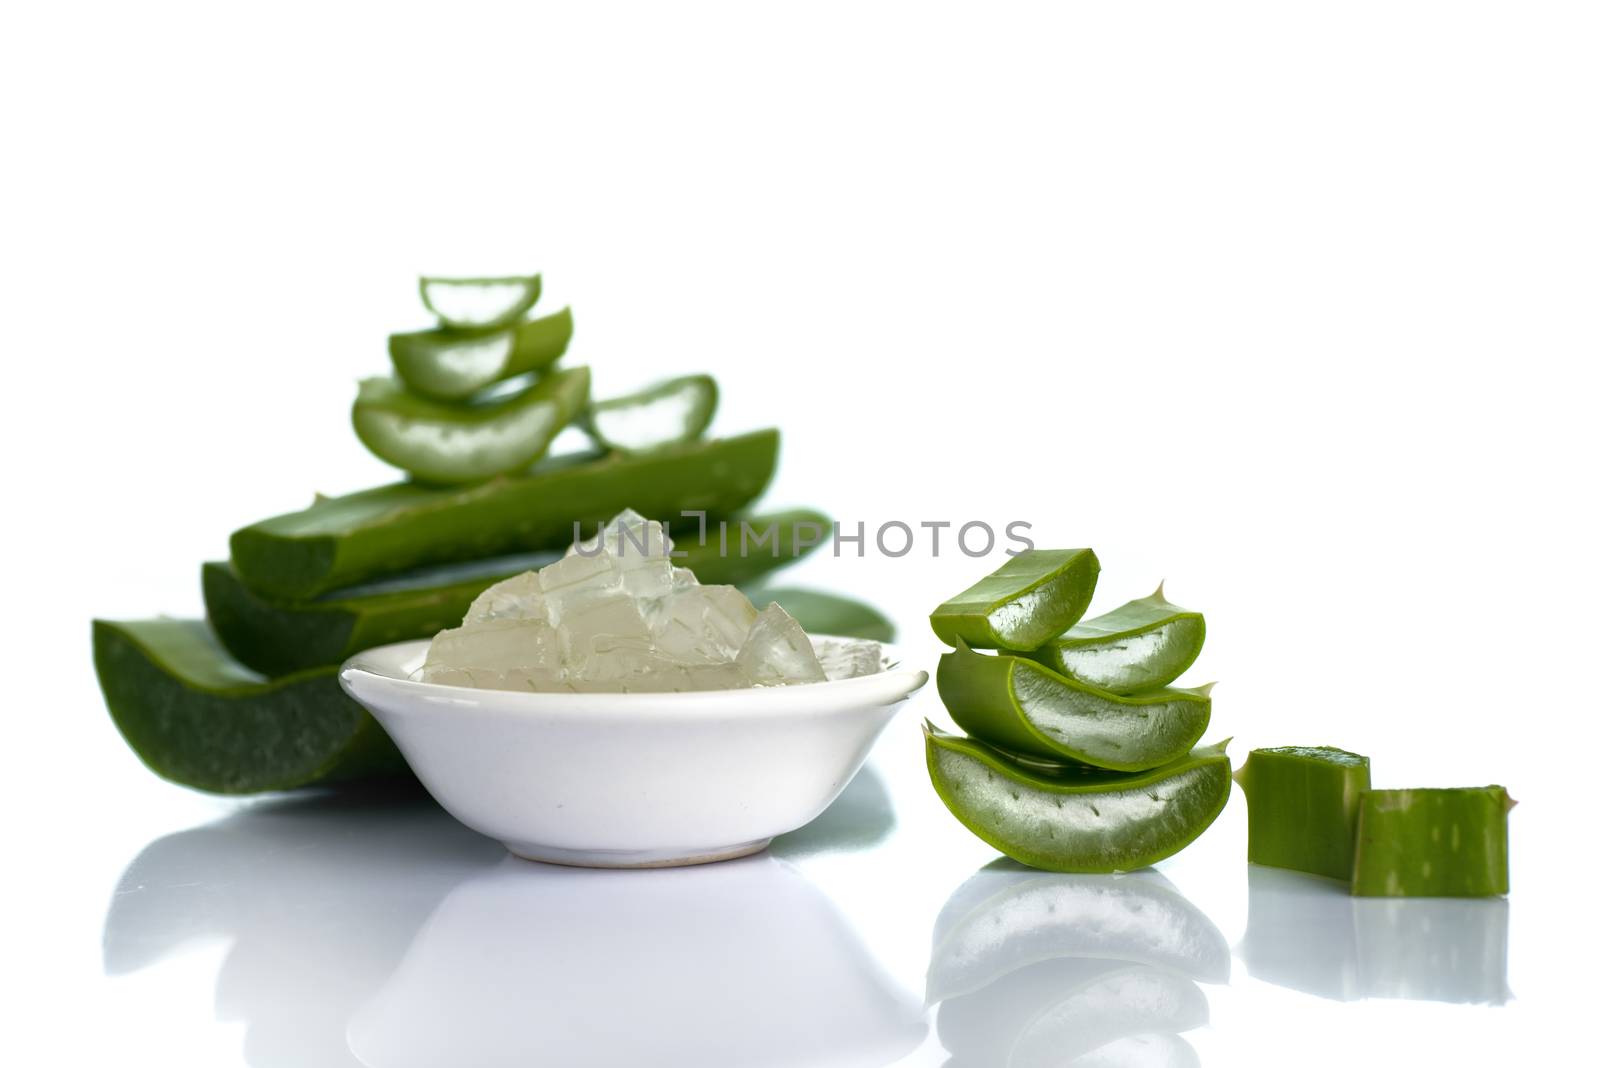 Slices of Aloe Vera leave and Aloe Vera gel in a bowl on a white background. Aloe Vera is a very useful herbal medicine for skin care and hair care.